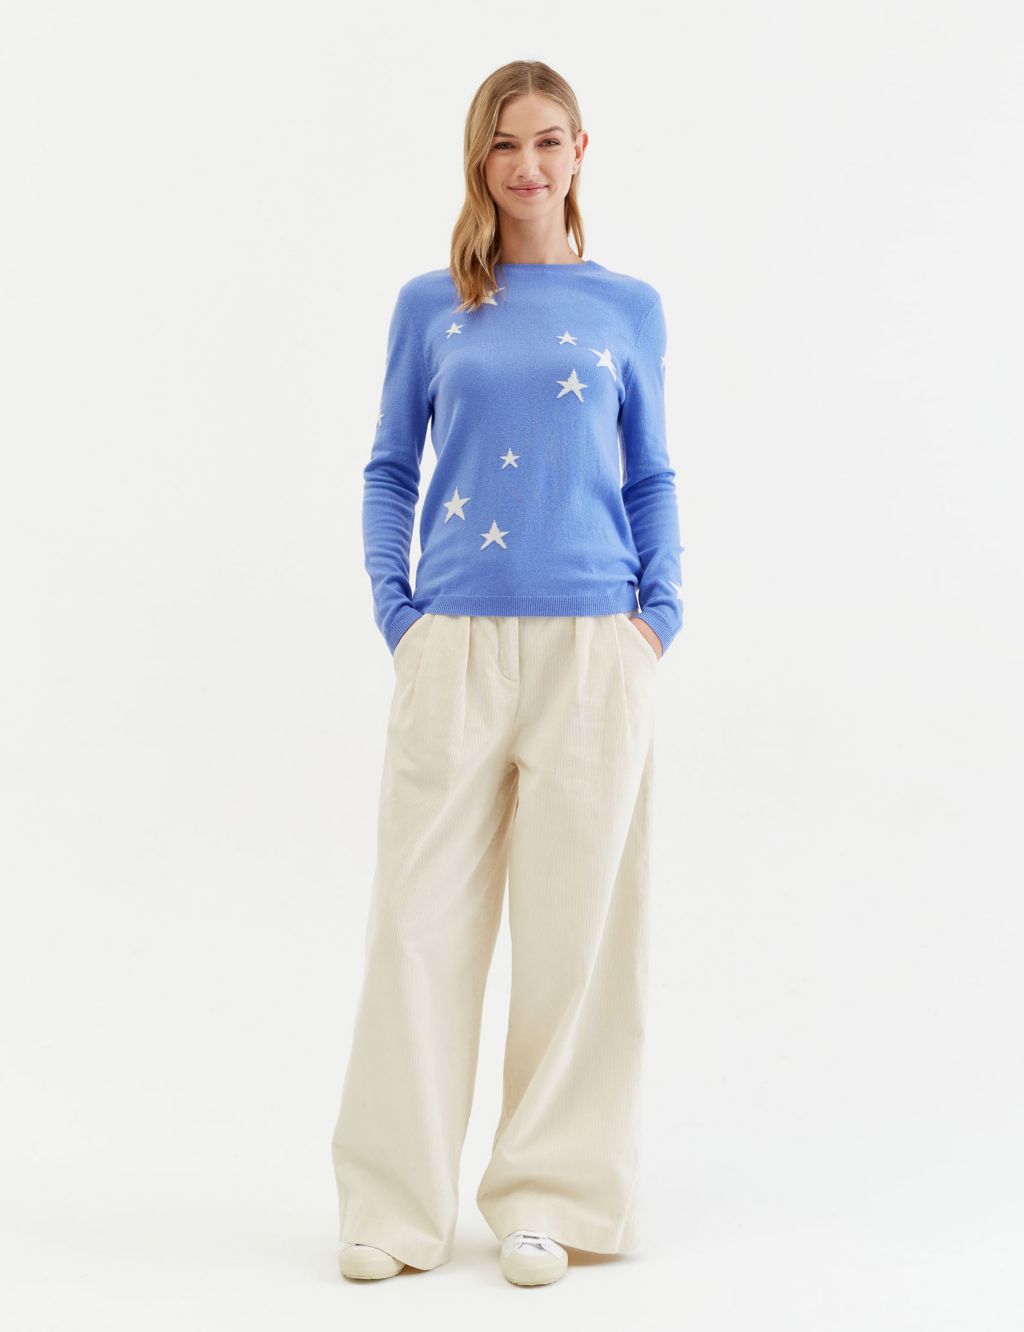 Wool Rich Star Jumper with Cashmere image 1